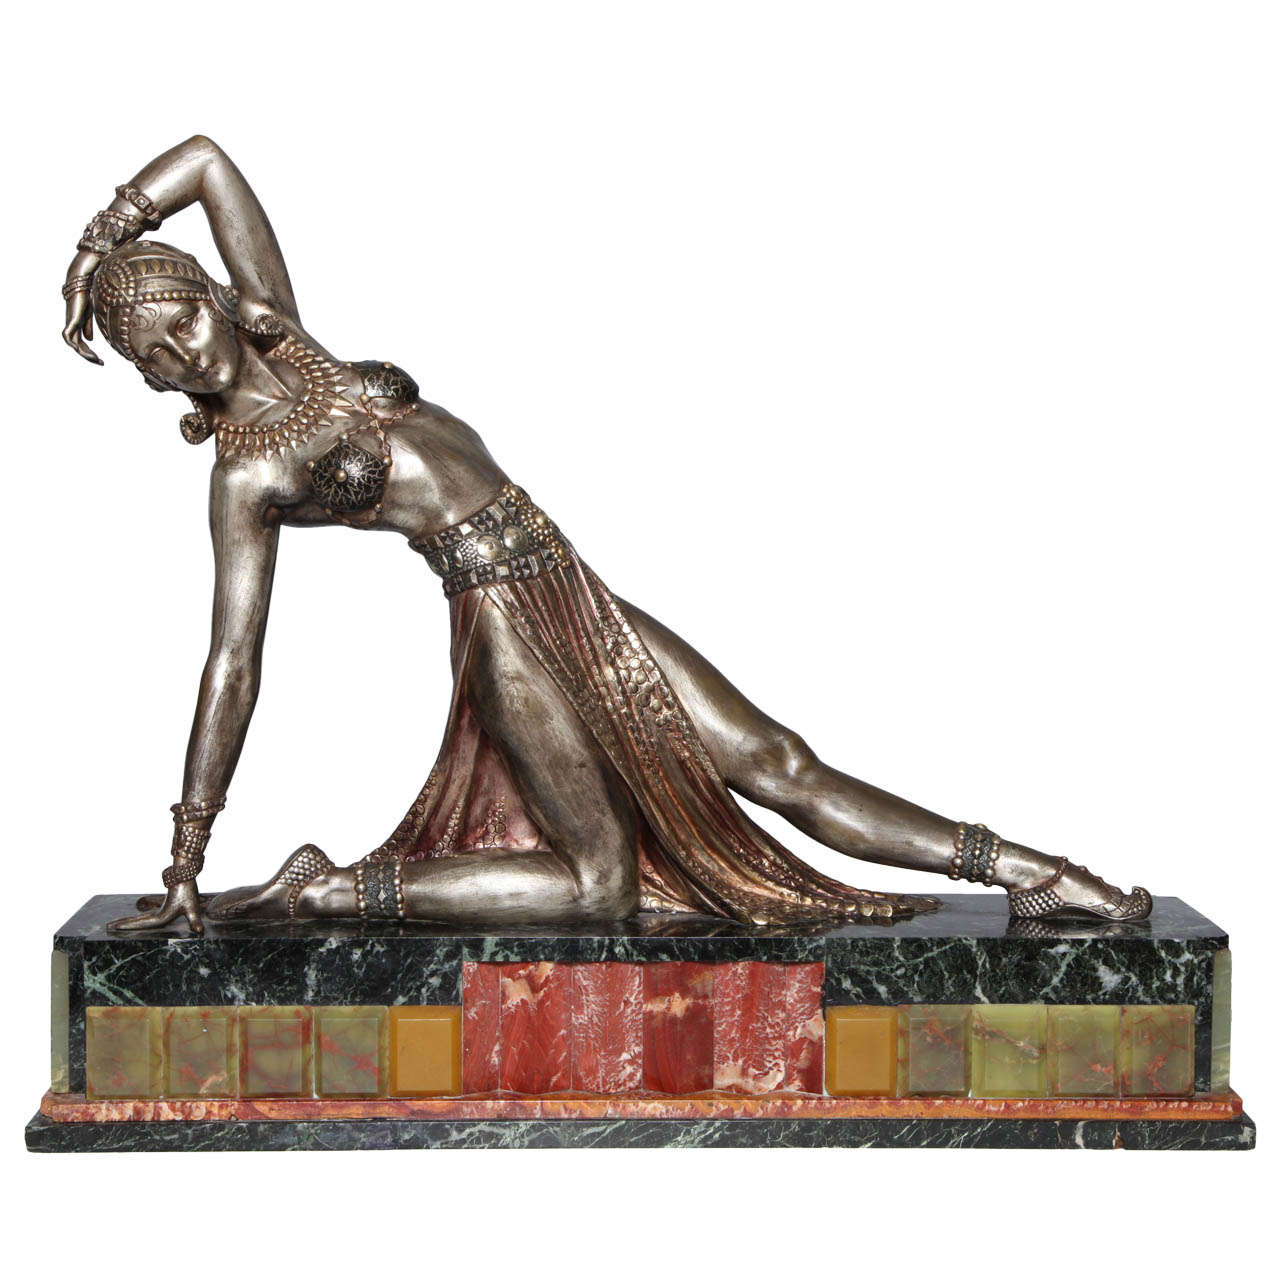 Demetre Chiparus (1886-1947) Early 20th c. Silvered and Gilt Bronze Exotic Dancer on Marble and Onyx Plinth